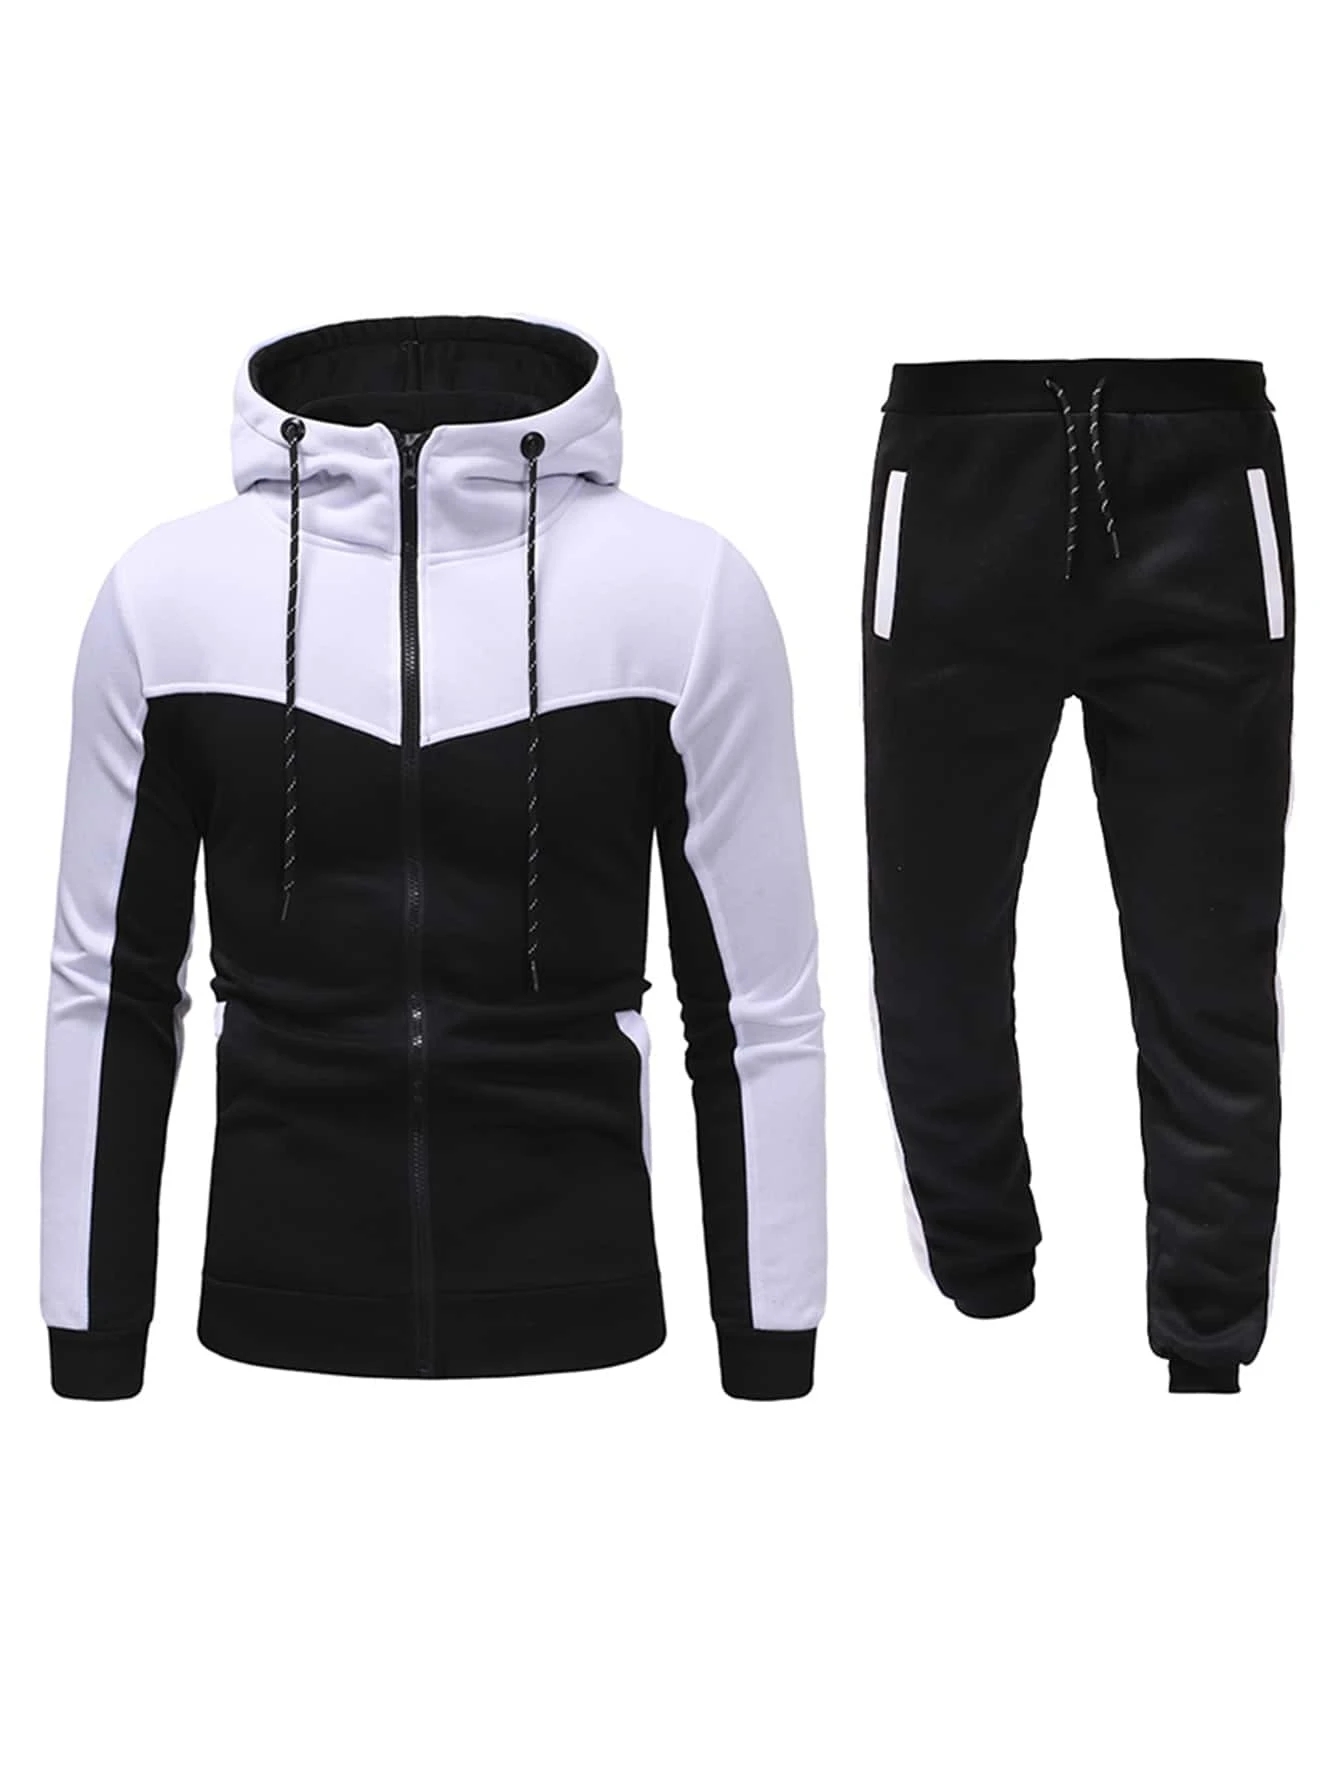 OEM men's cheap couture fluffy tracksuits